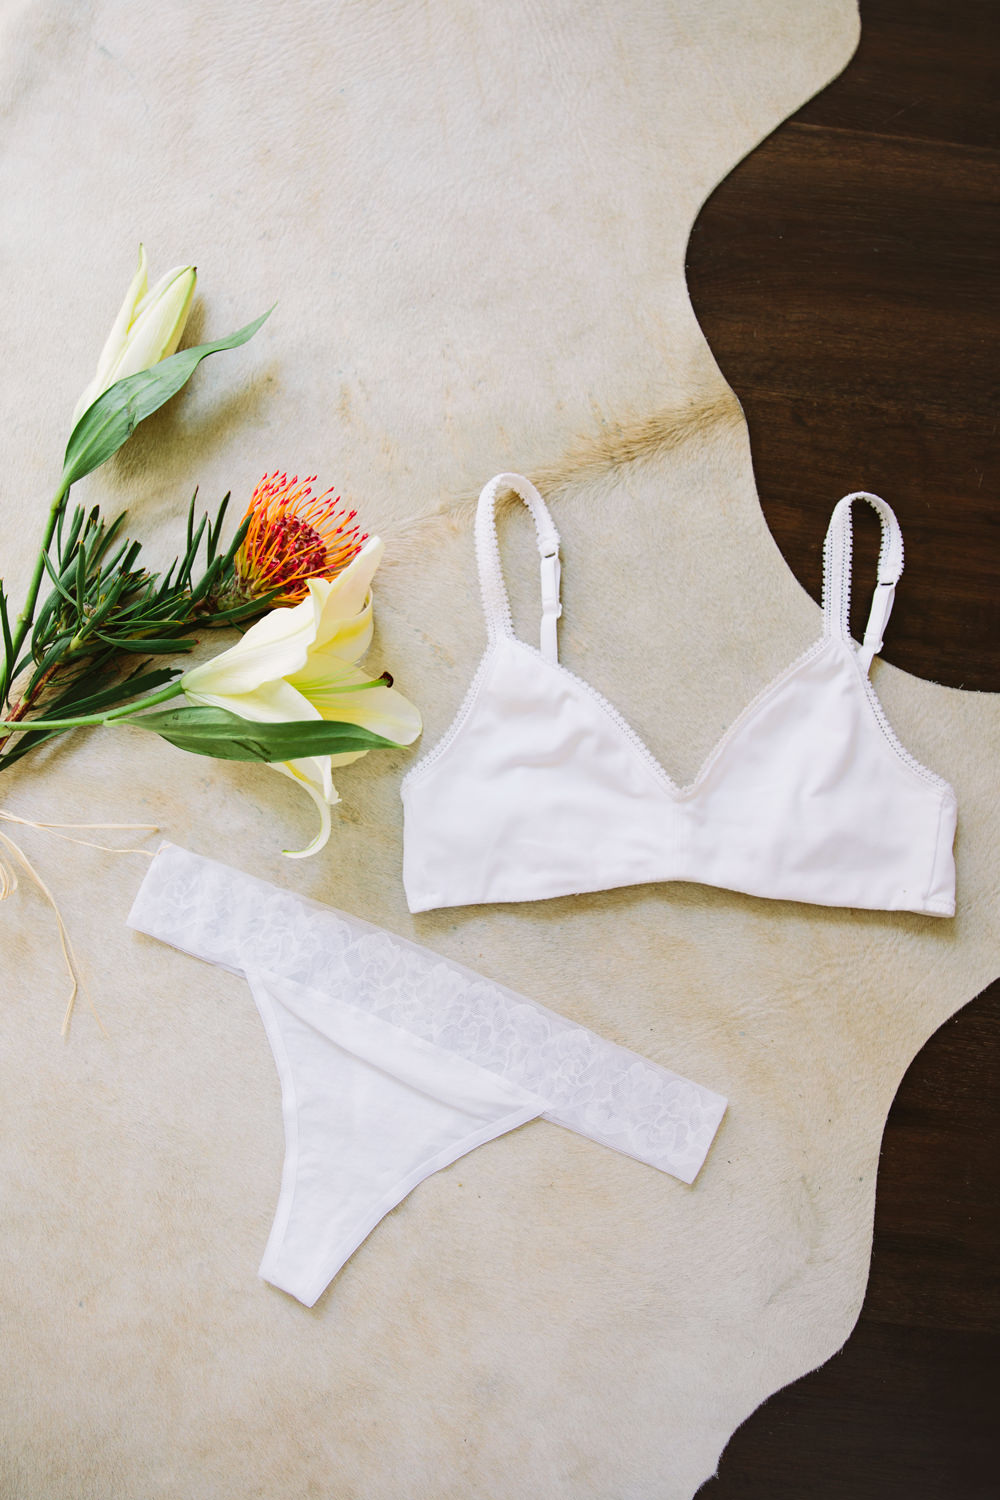 Dash of Darling blogs from home in her On Gossamer cotton loungewear bra and panty set.